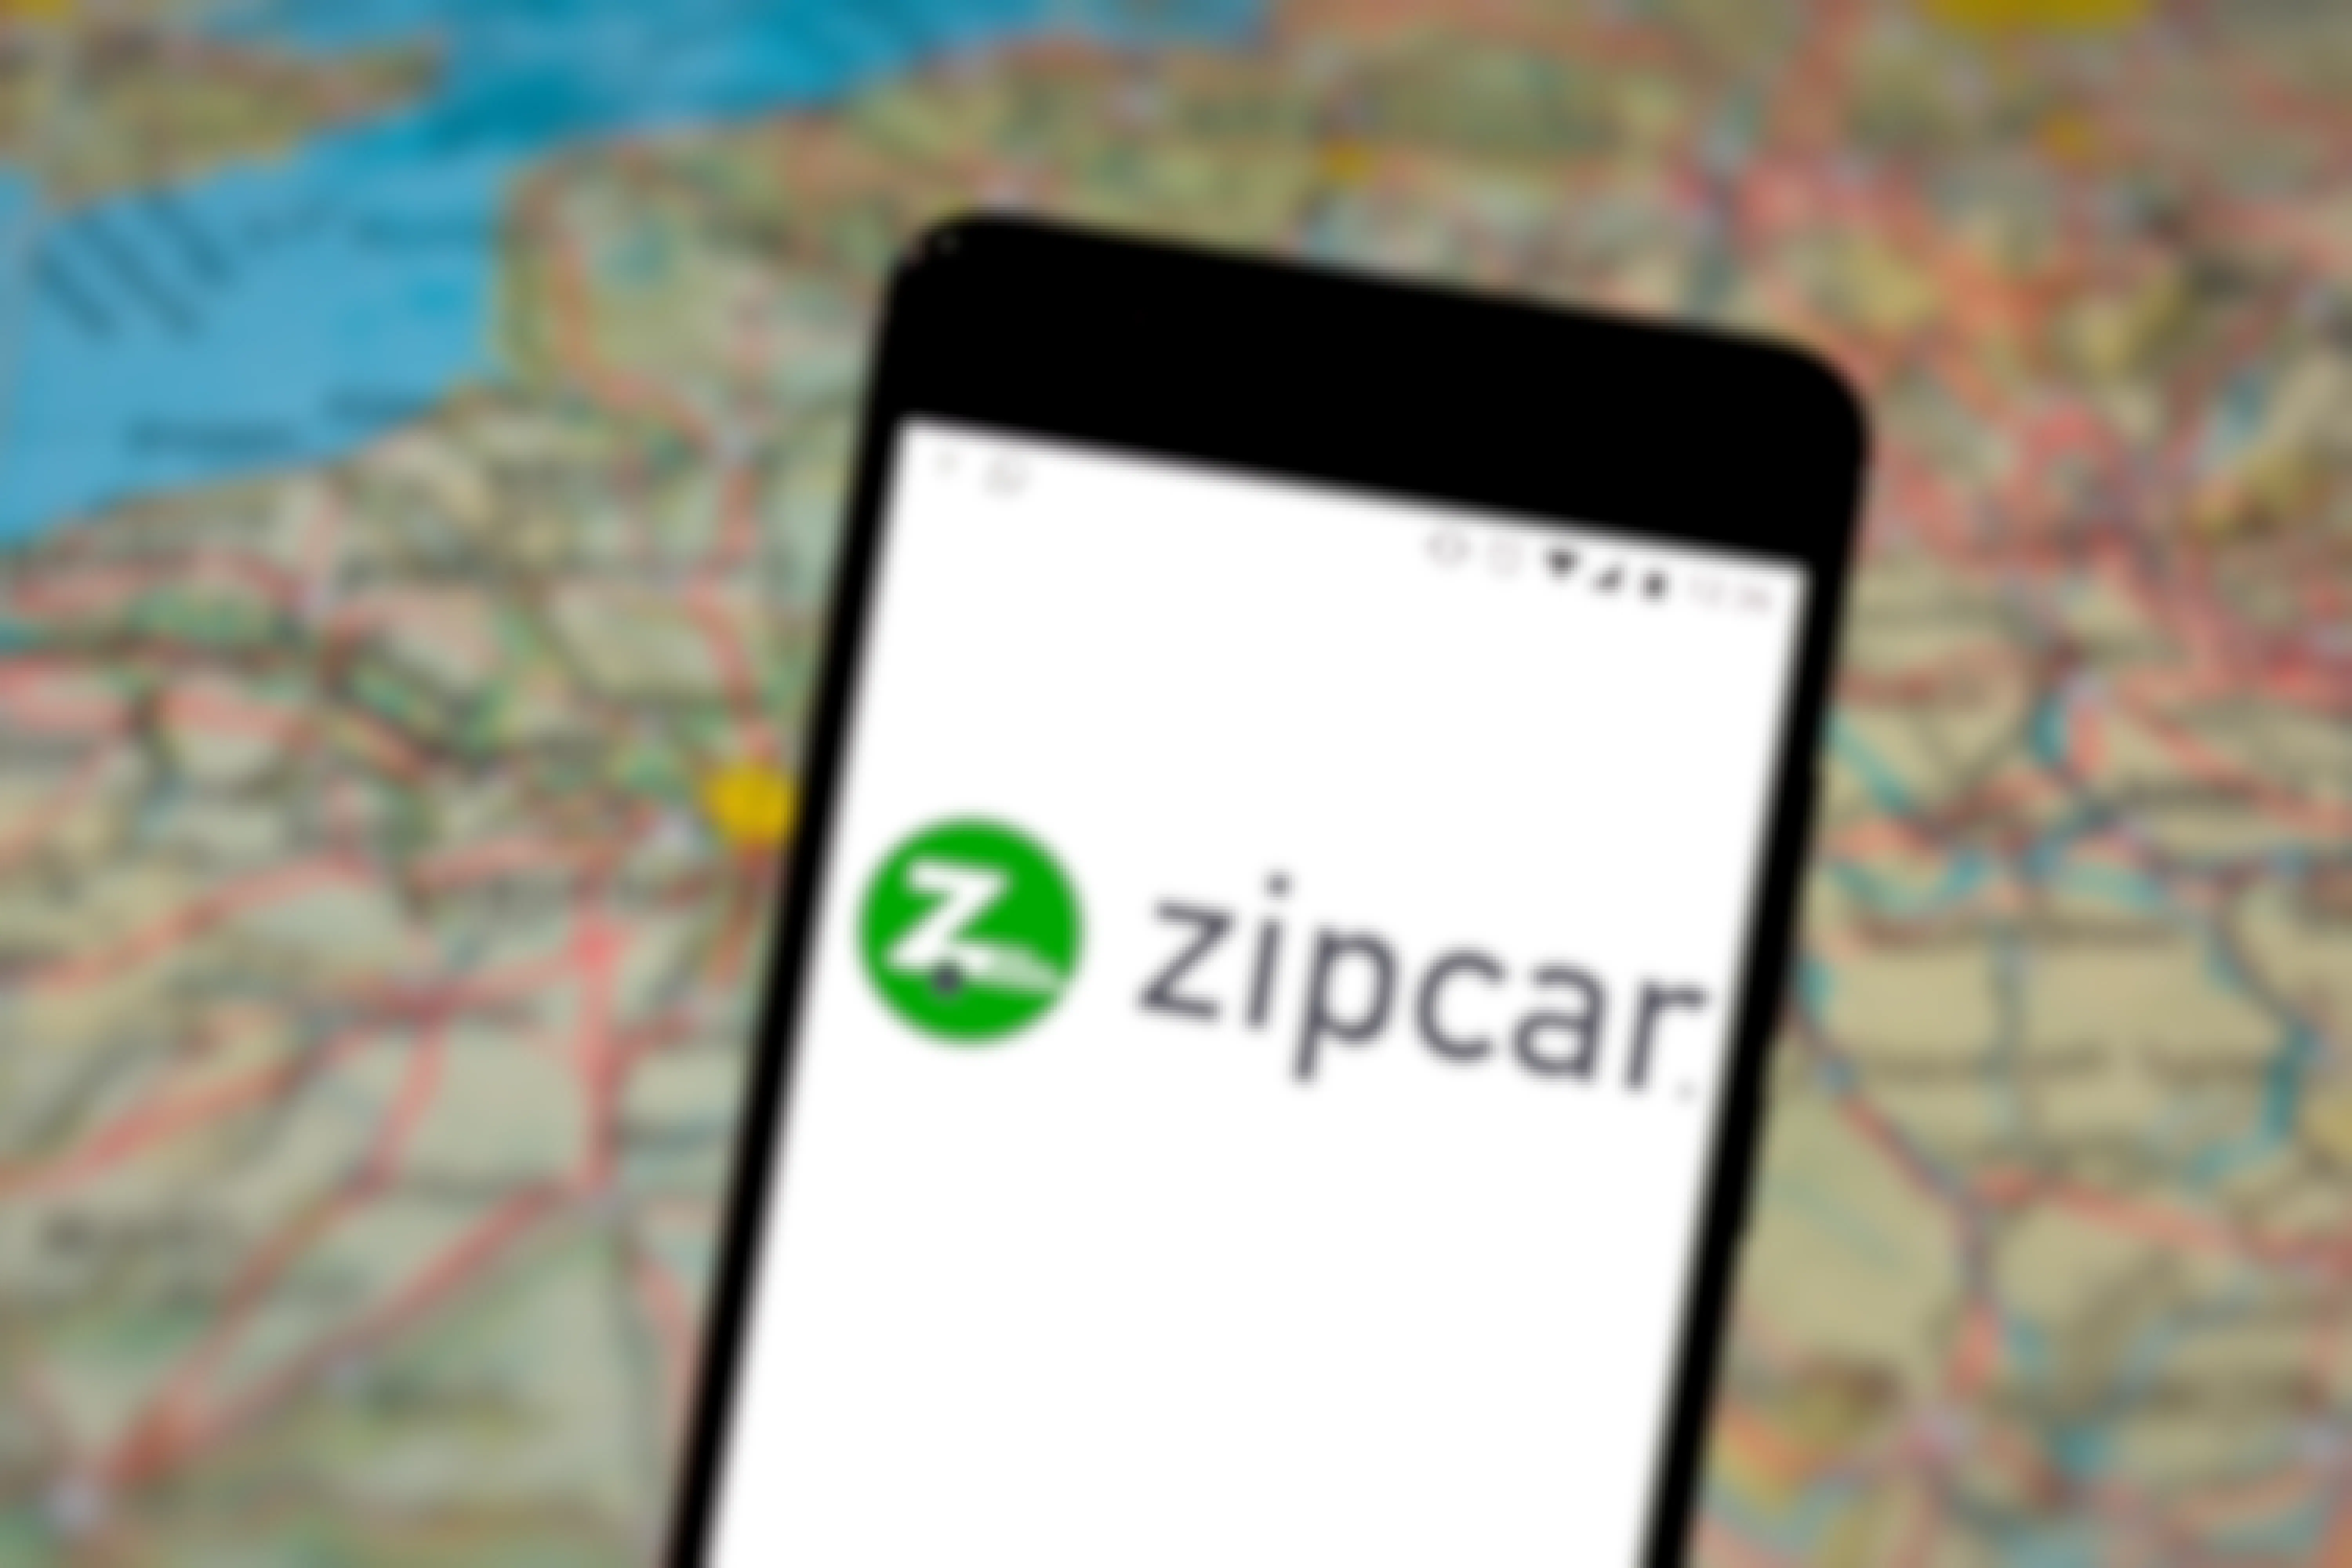 Zipcar logo on iphone with a blurred map as the background